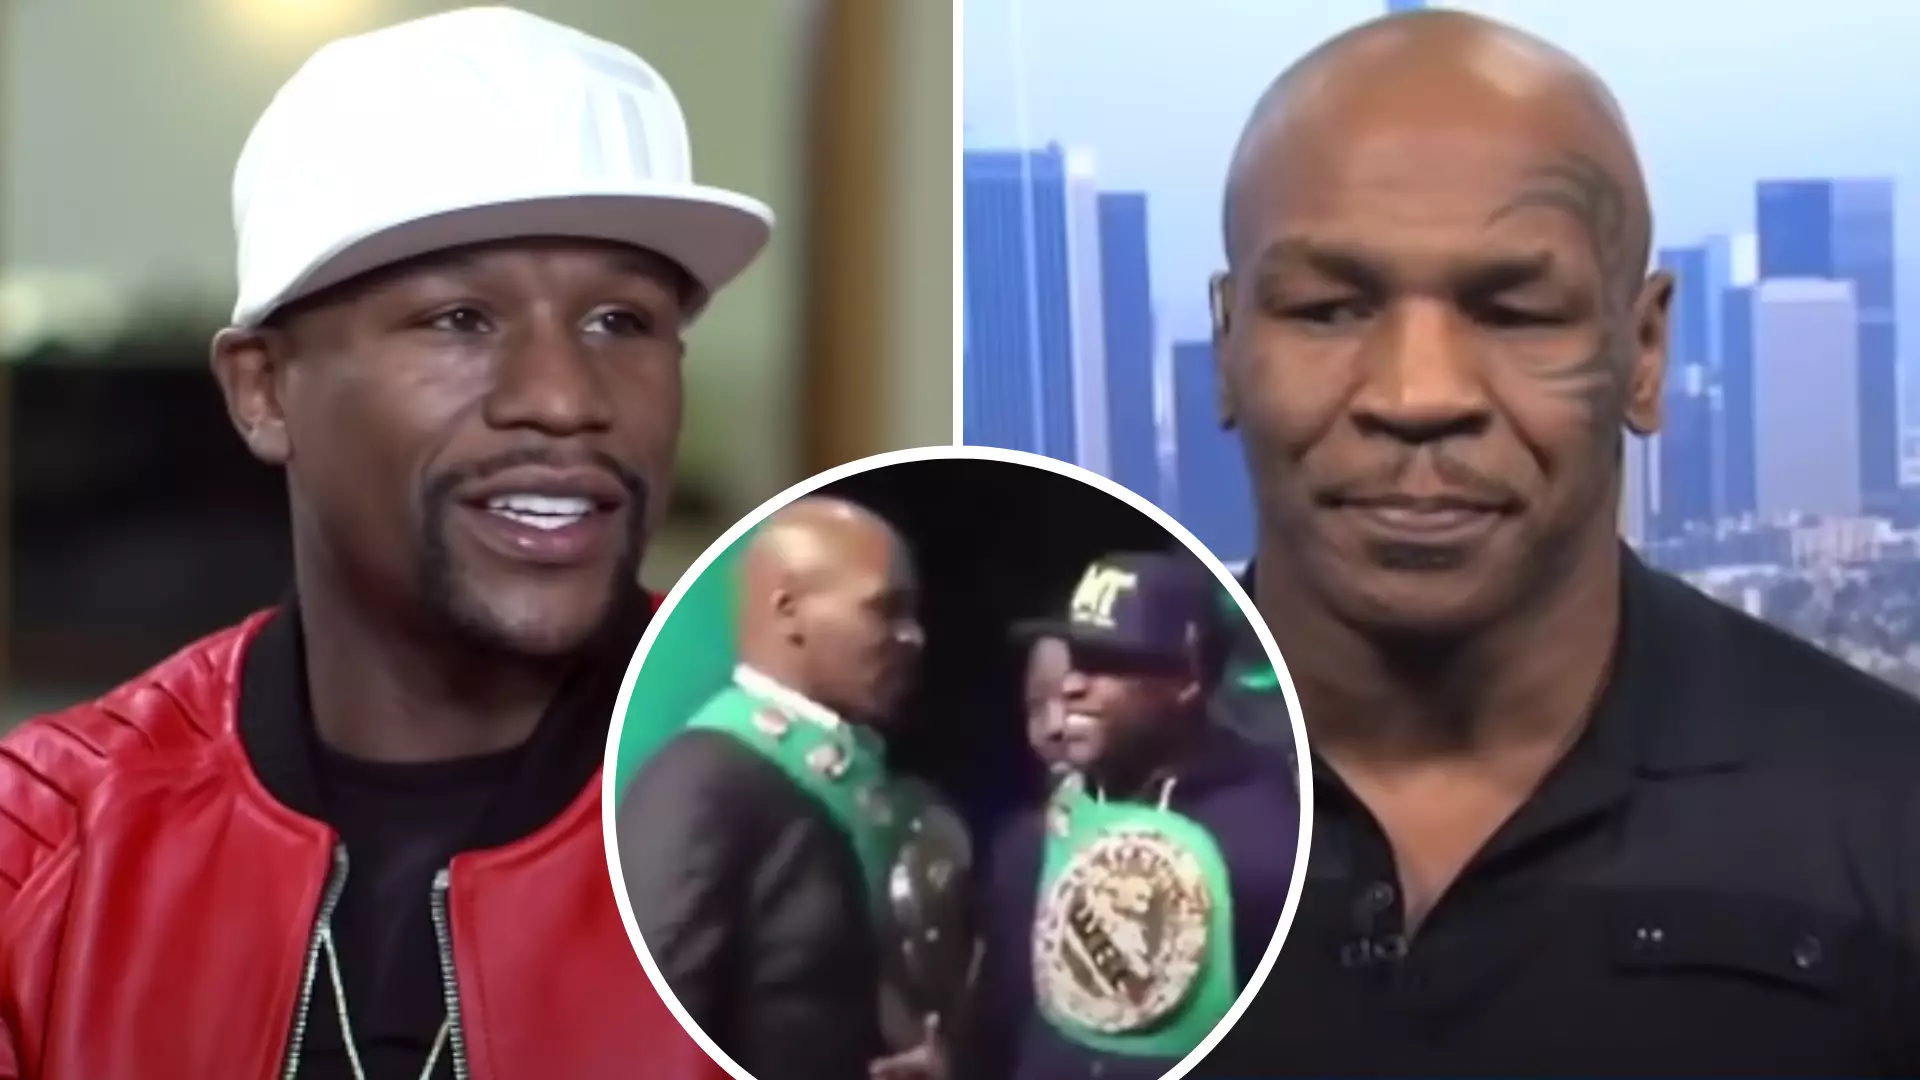 Mike Tyson Says Prime Version Of Himself Would Kick Floyd Mayweather's 'A**e' In A Street Fight